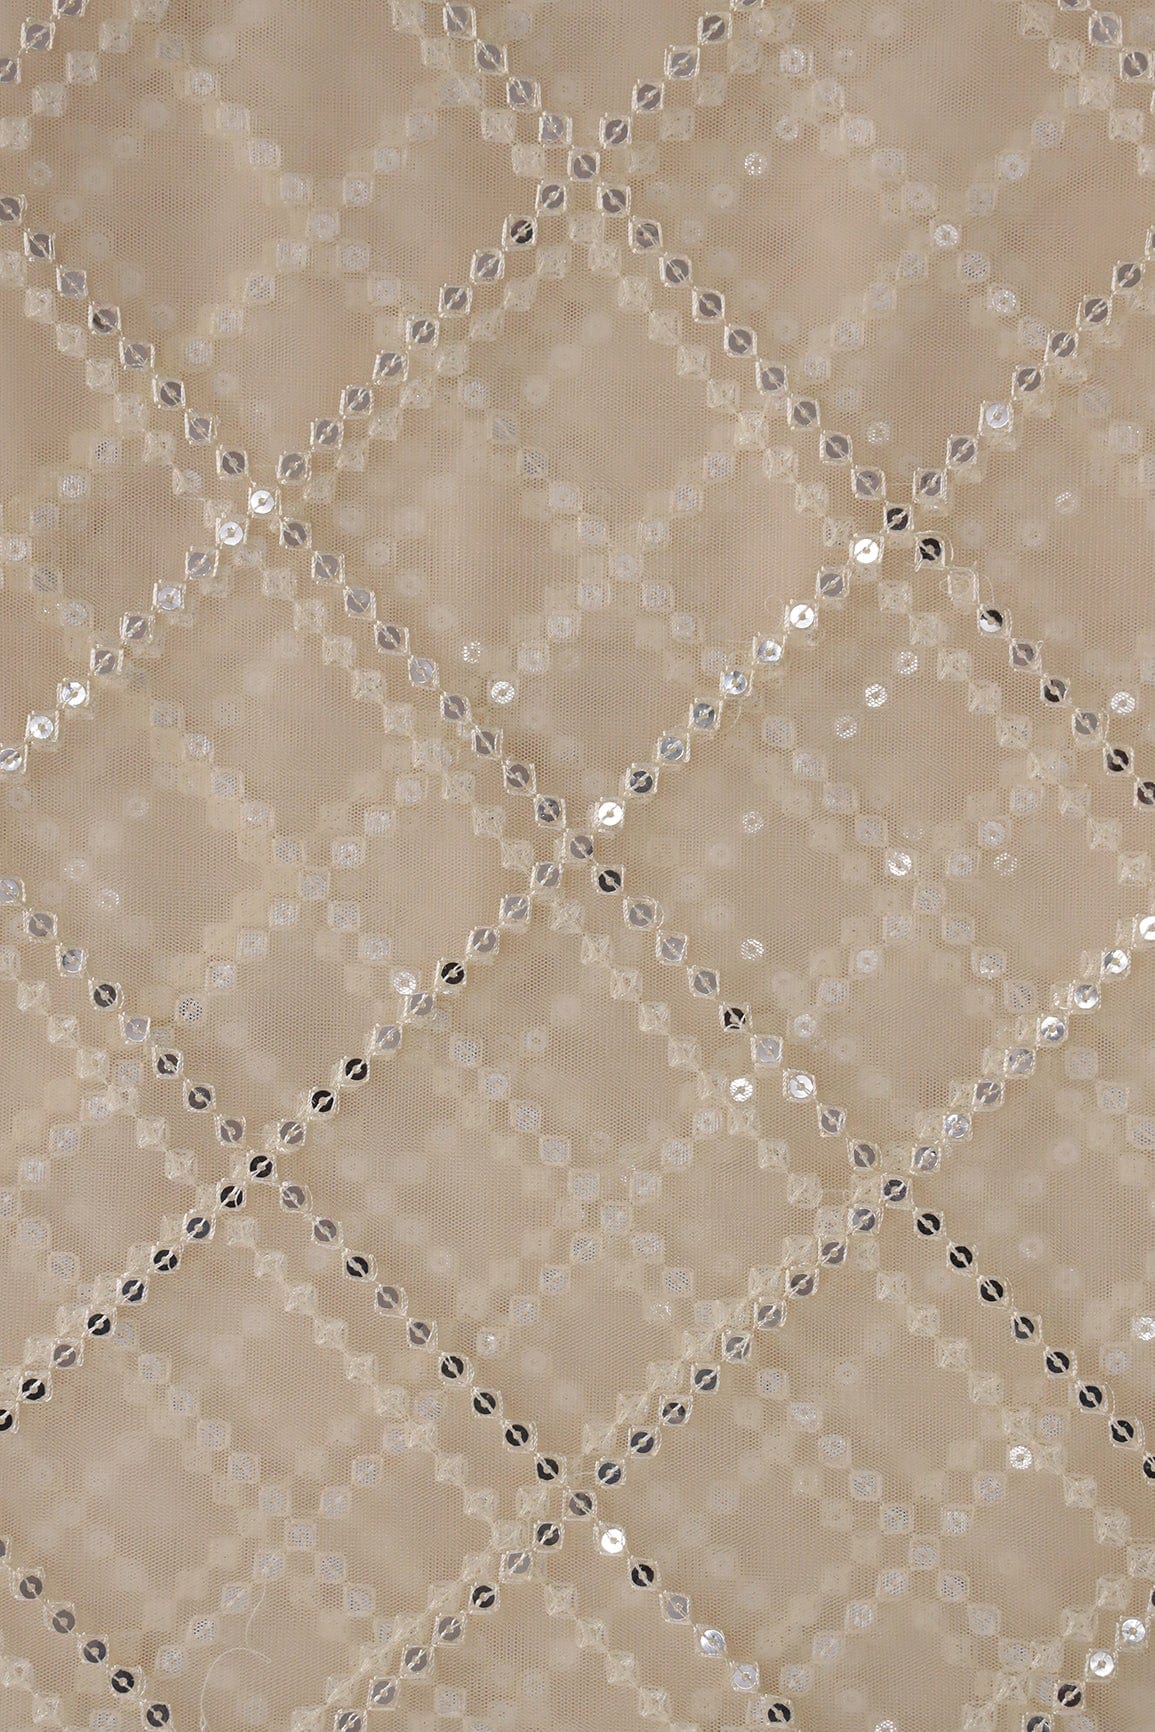 doeraa Embroidery Fabrics Silver Sequins With Thread Checks Embroidery Work On Cream Soft Net Fabric